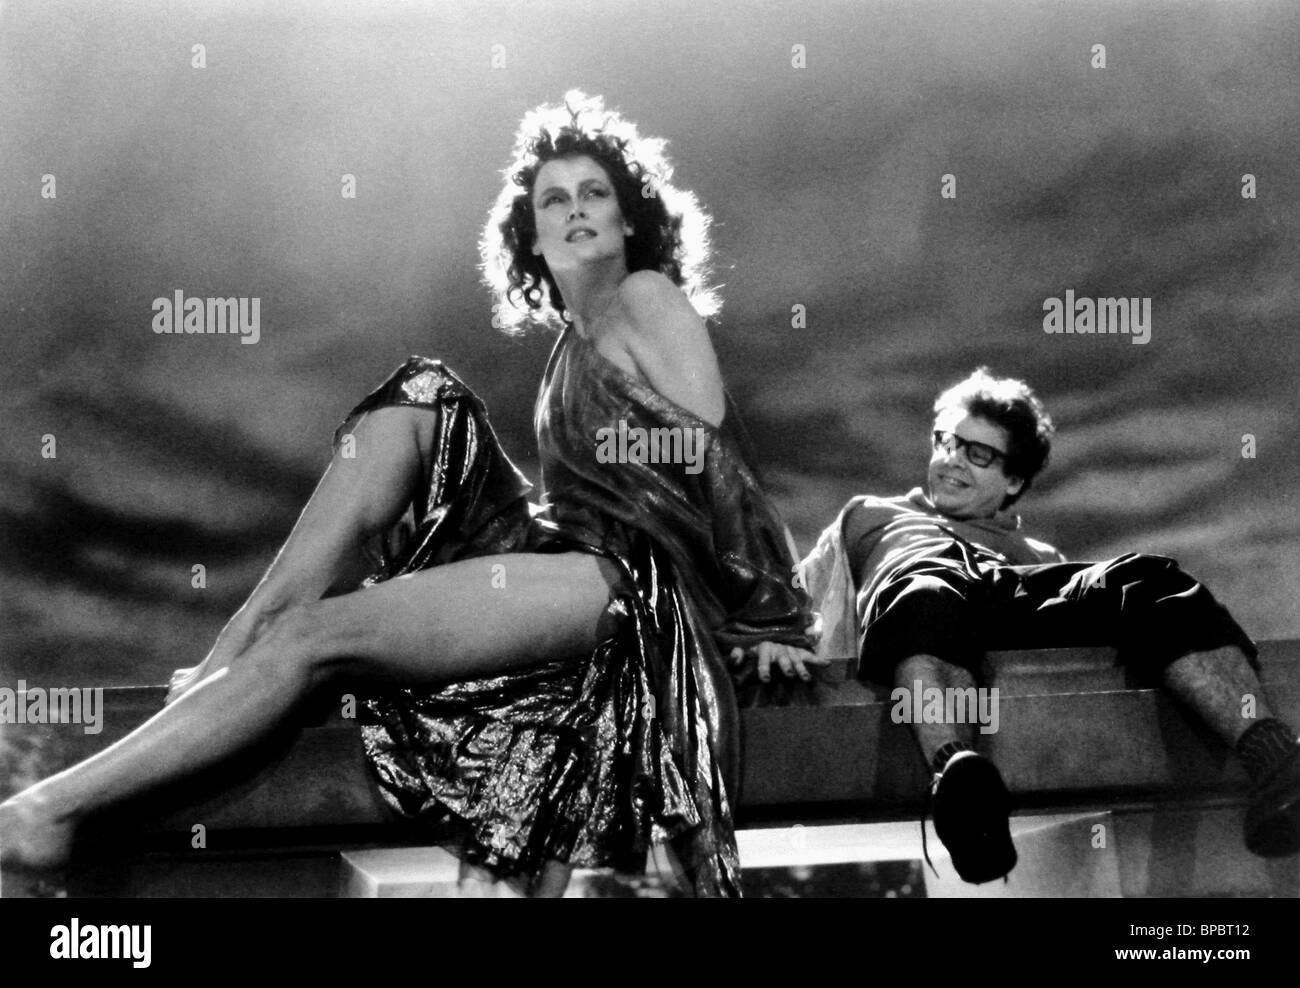 Ghostbusters Black and White Stock Photos & Images - Alamy1300 x 988